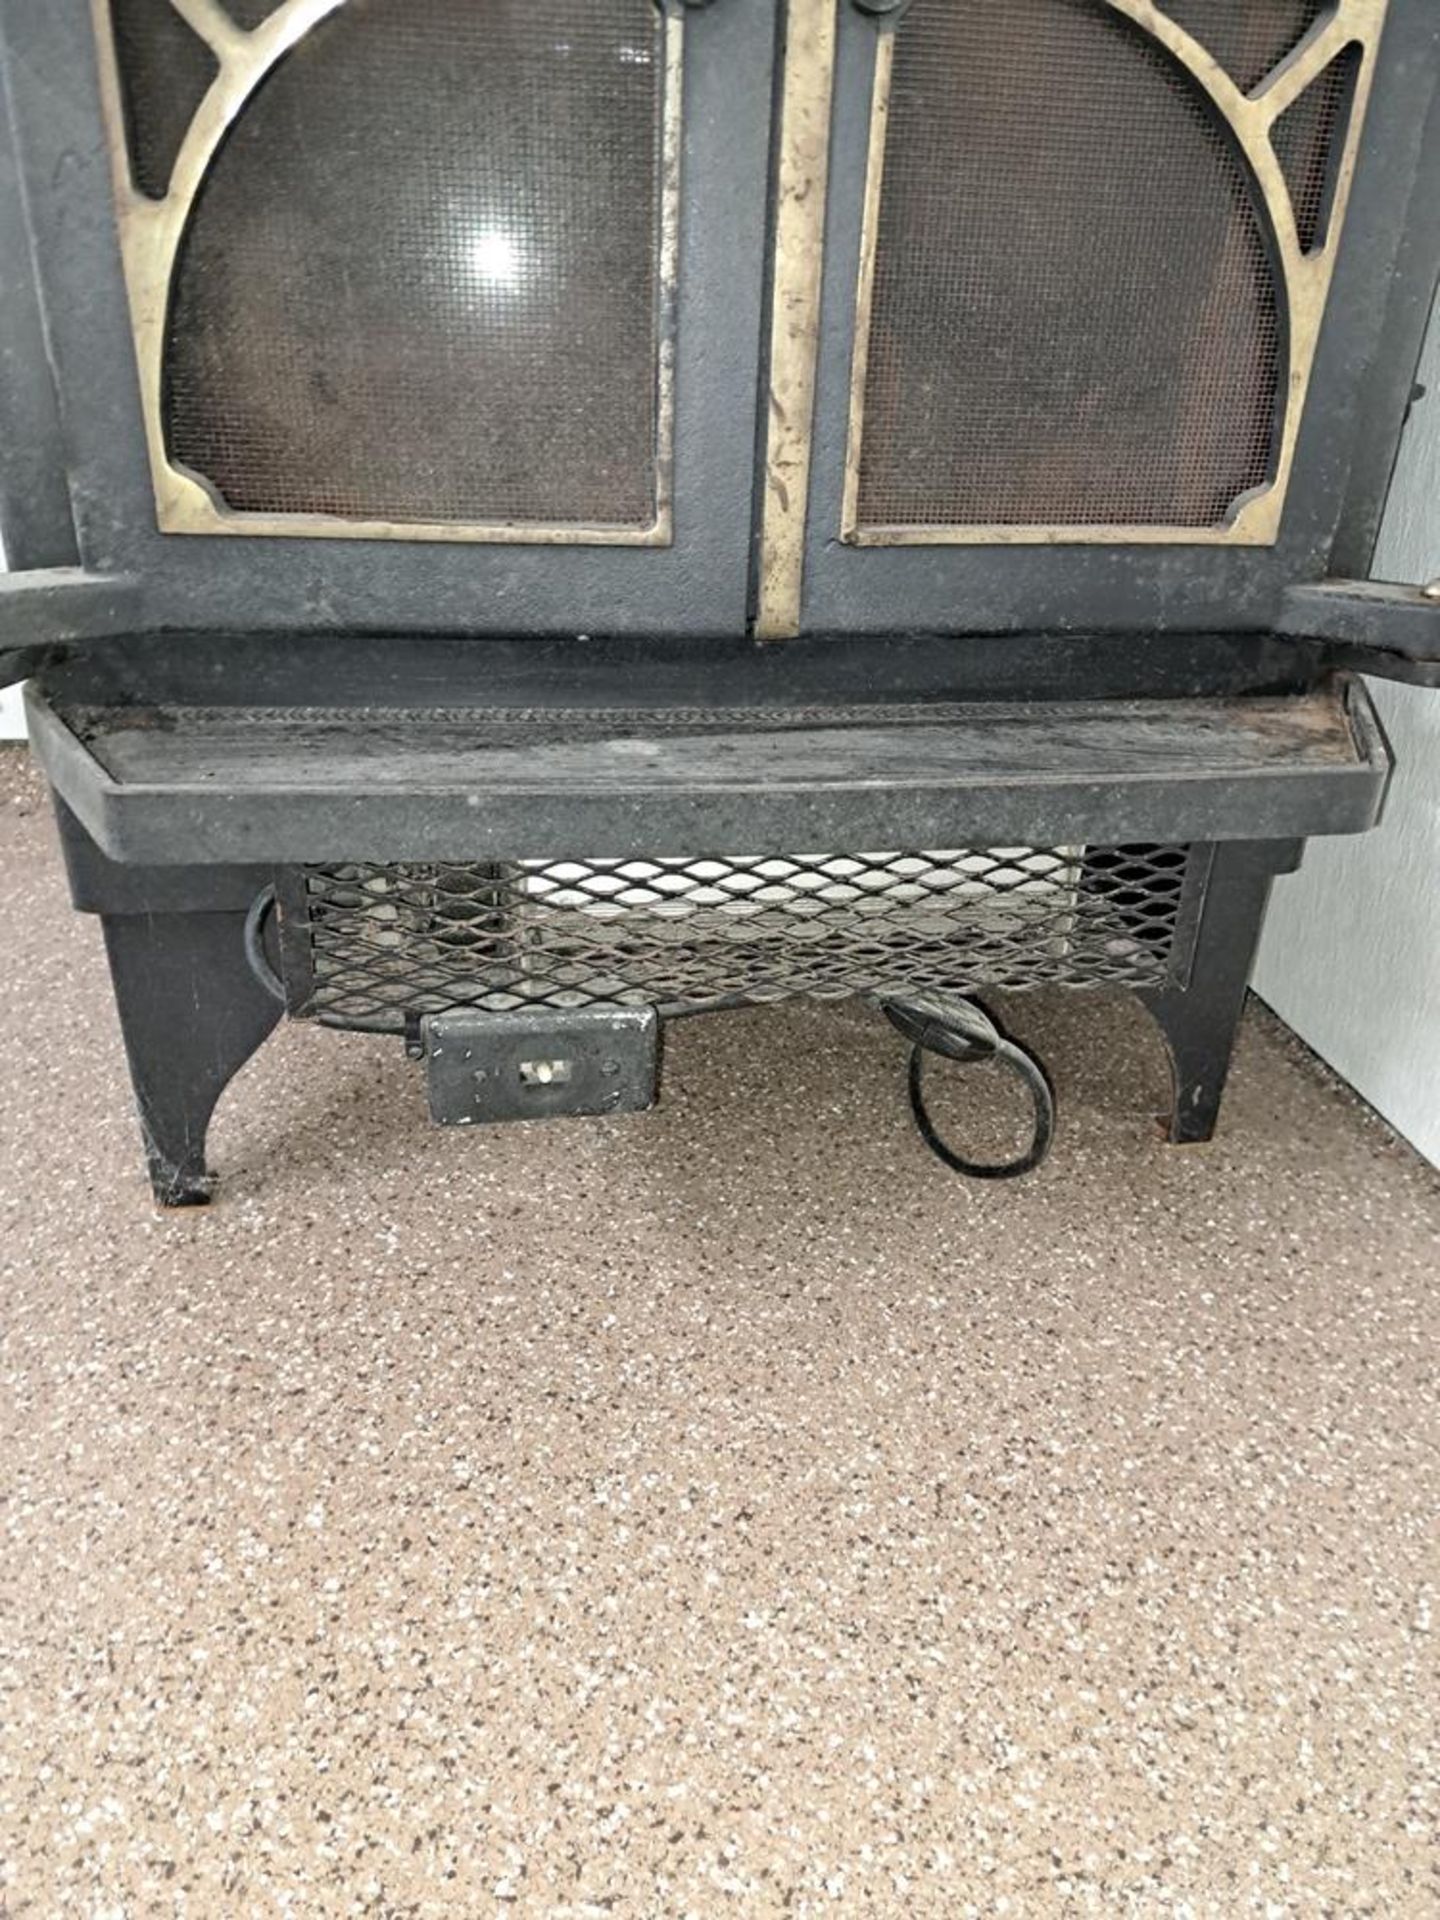 Wood Burning Stove, 30" wide X 32" deep X 36" tall (Required Loading Fee: $50.00) NO HAND CARRY ( - Image 2 of 4